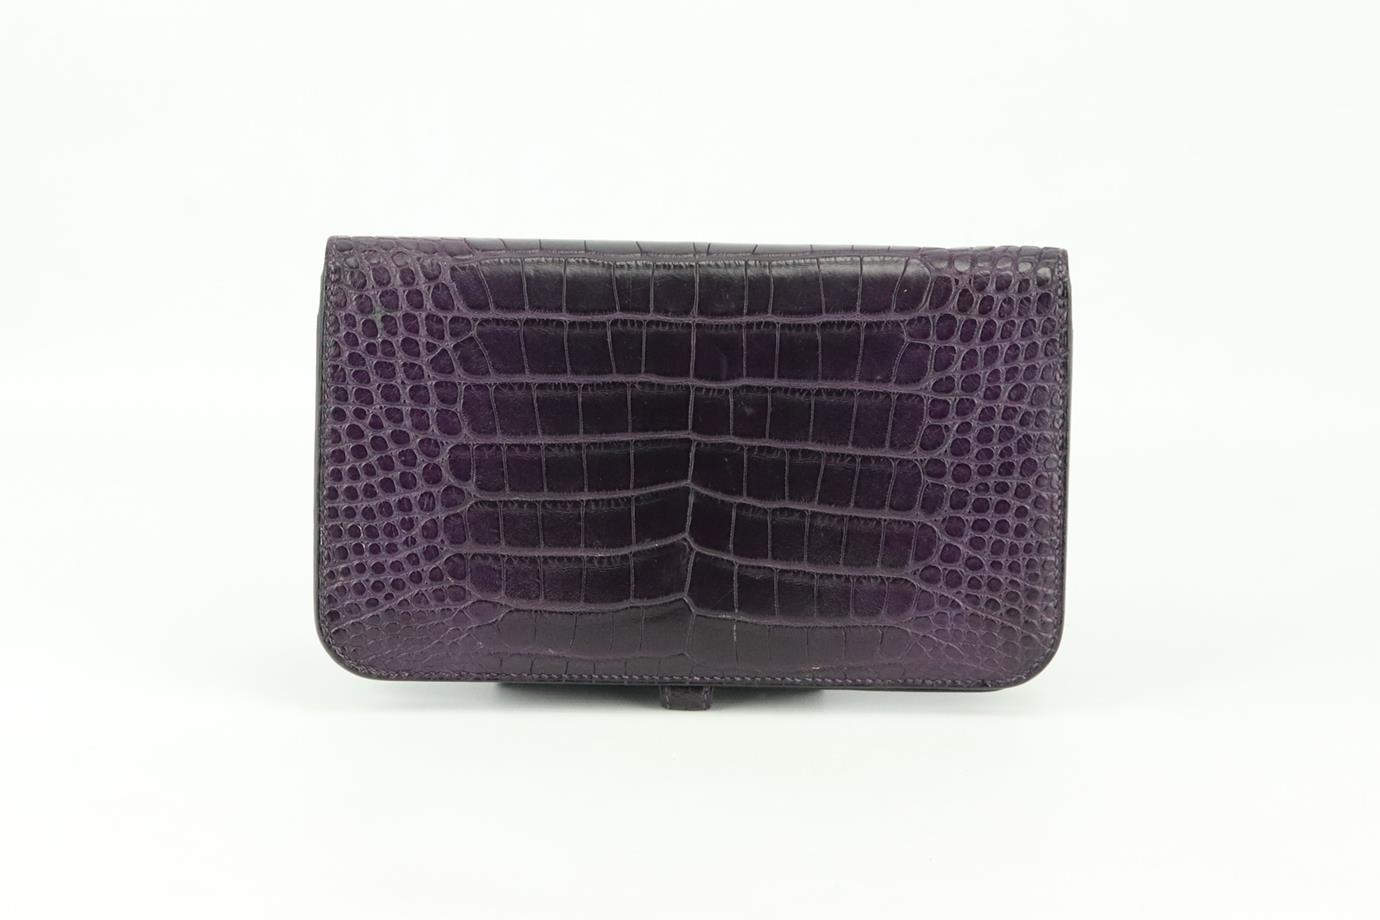 Hermès 2014 Dogon Duo Alligator Mississippiensis and leather wallet. Made from matte Alligator Mississippiensis exterior in rich-purple and matching leather interior, it is decorated with palladium hardware on the front flap and finished with 5 card